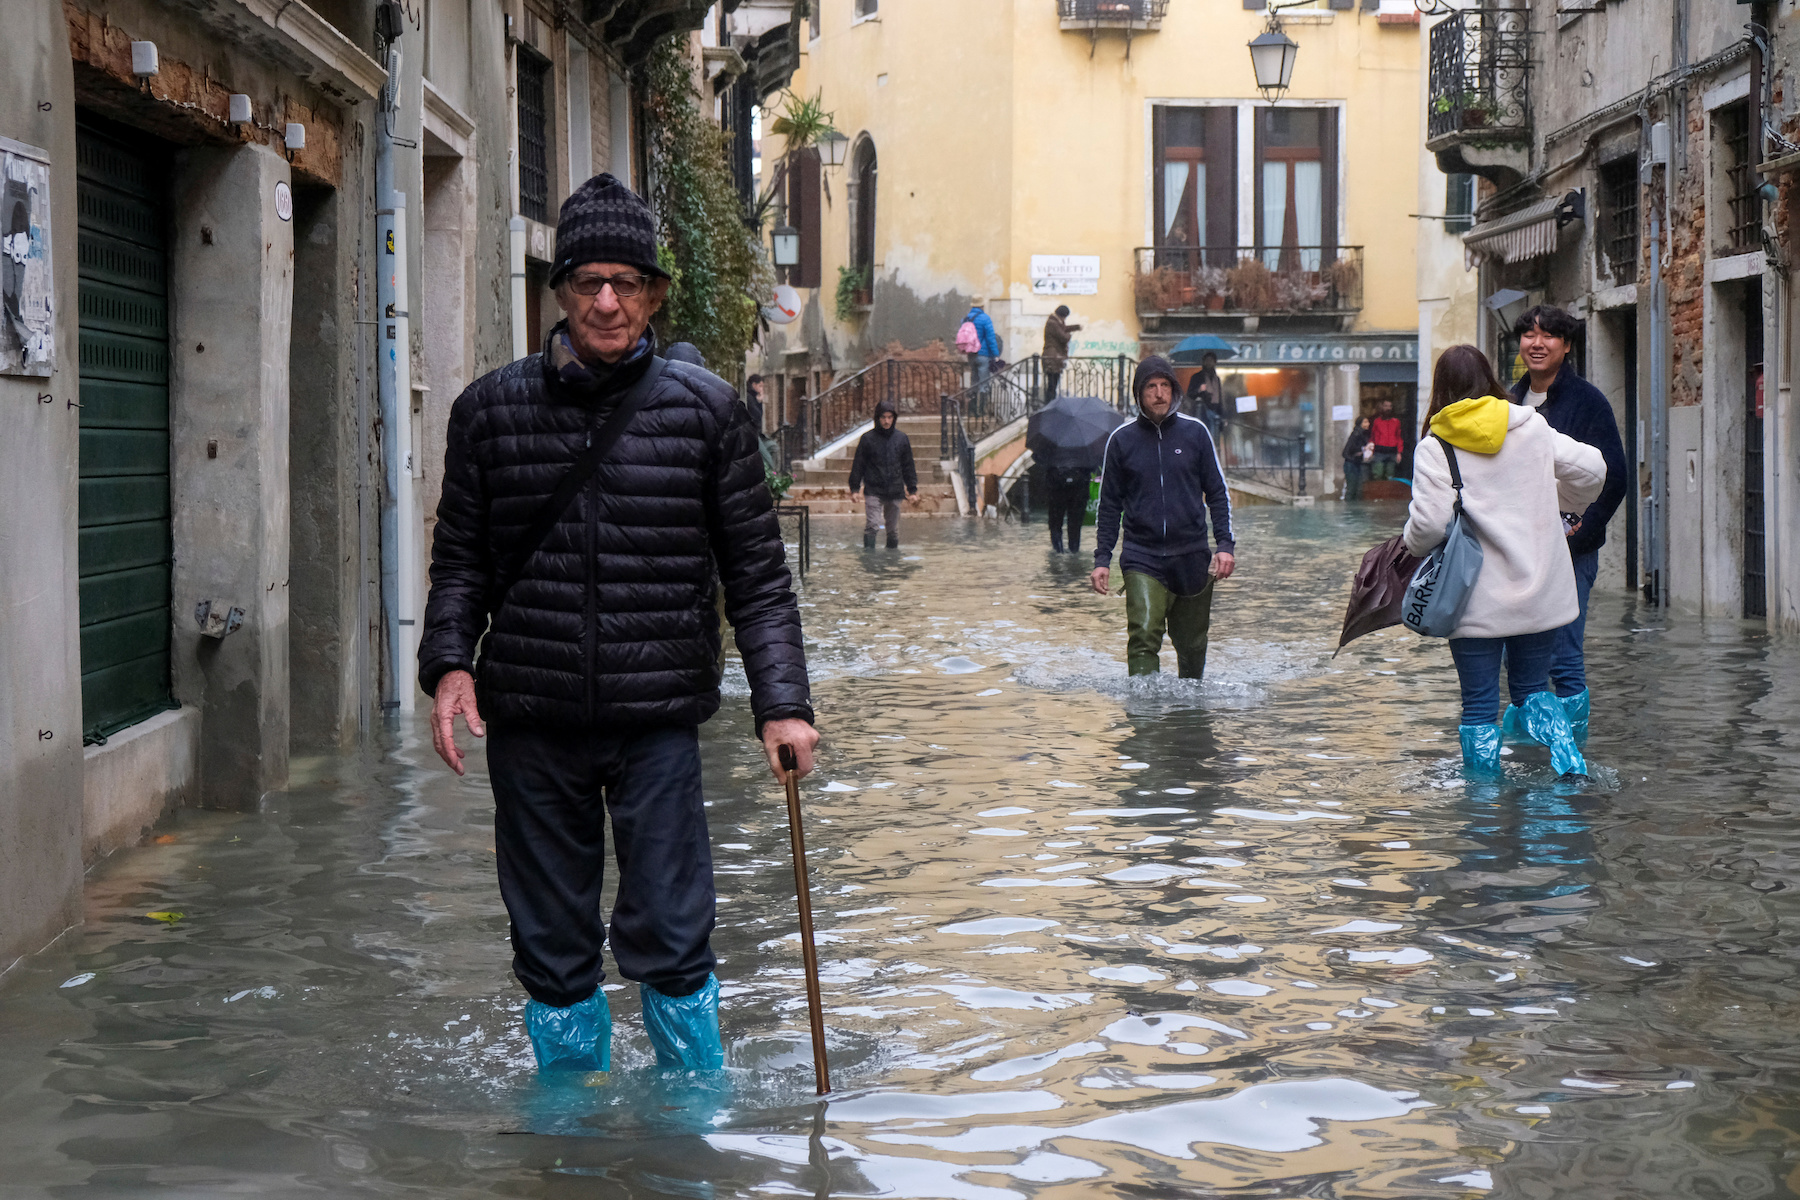 People walk outside during exceptionally high water levels in Venice